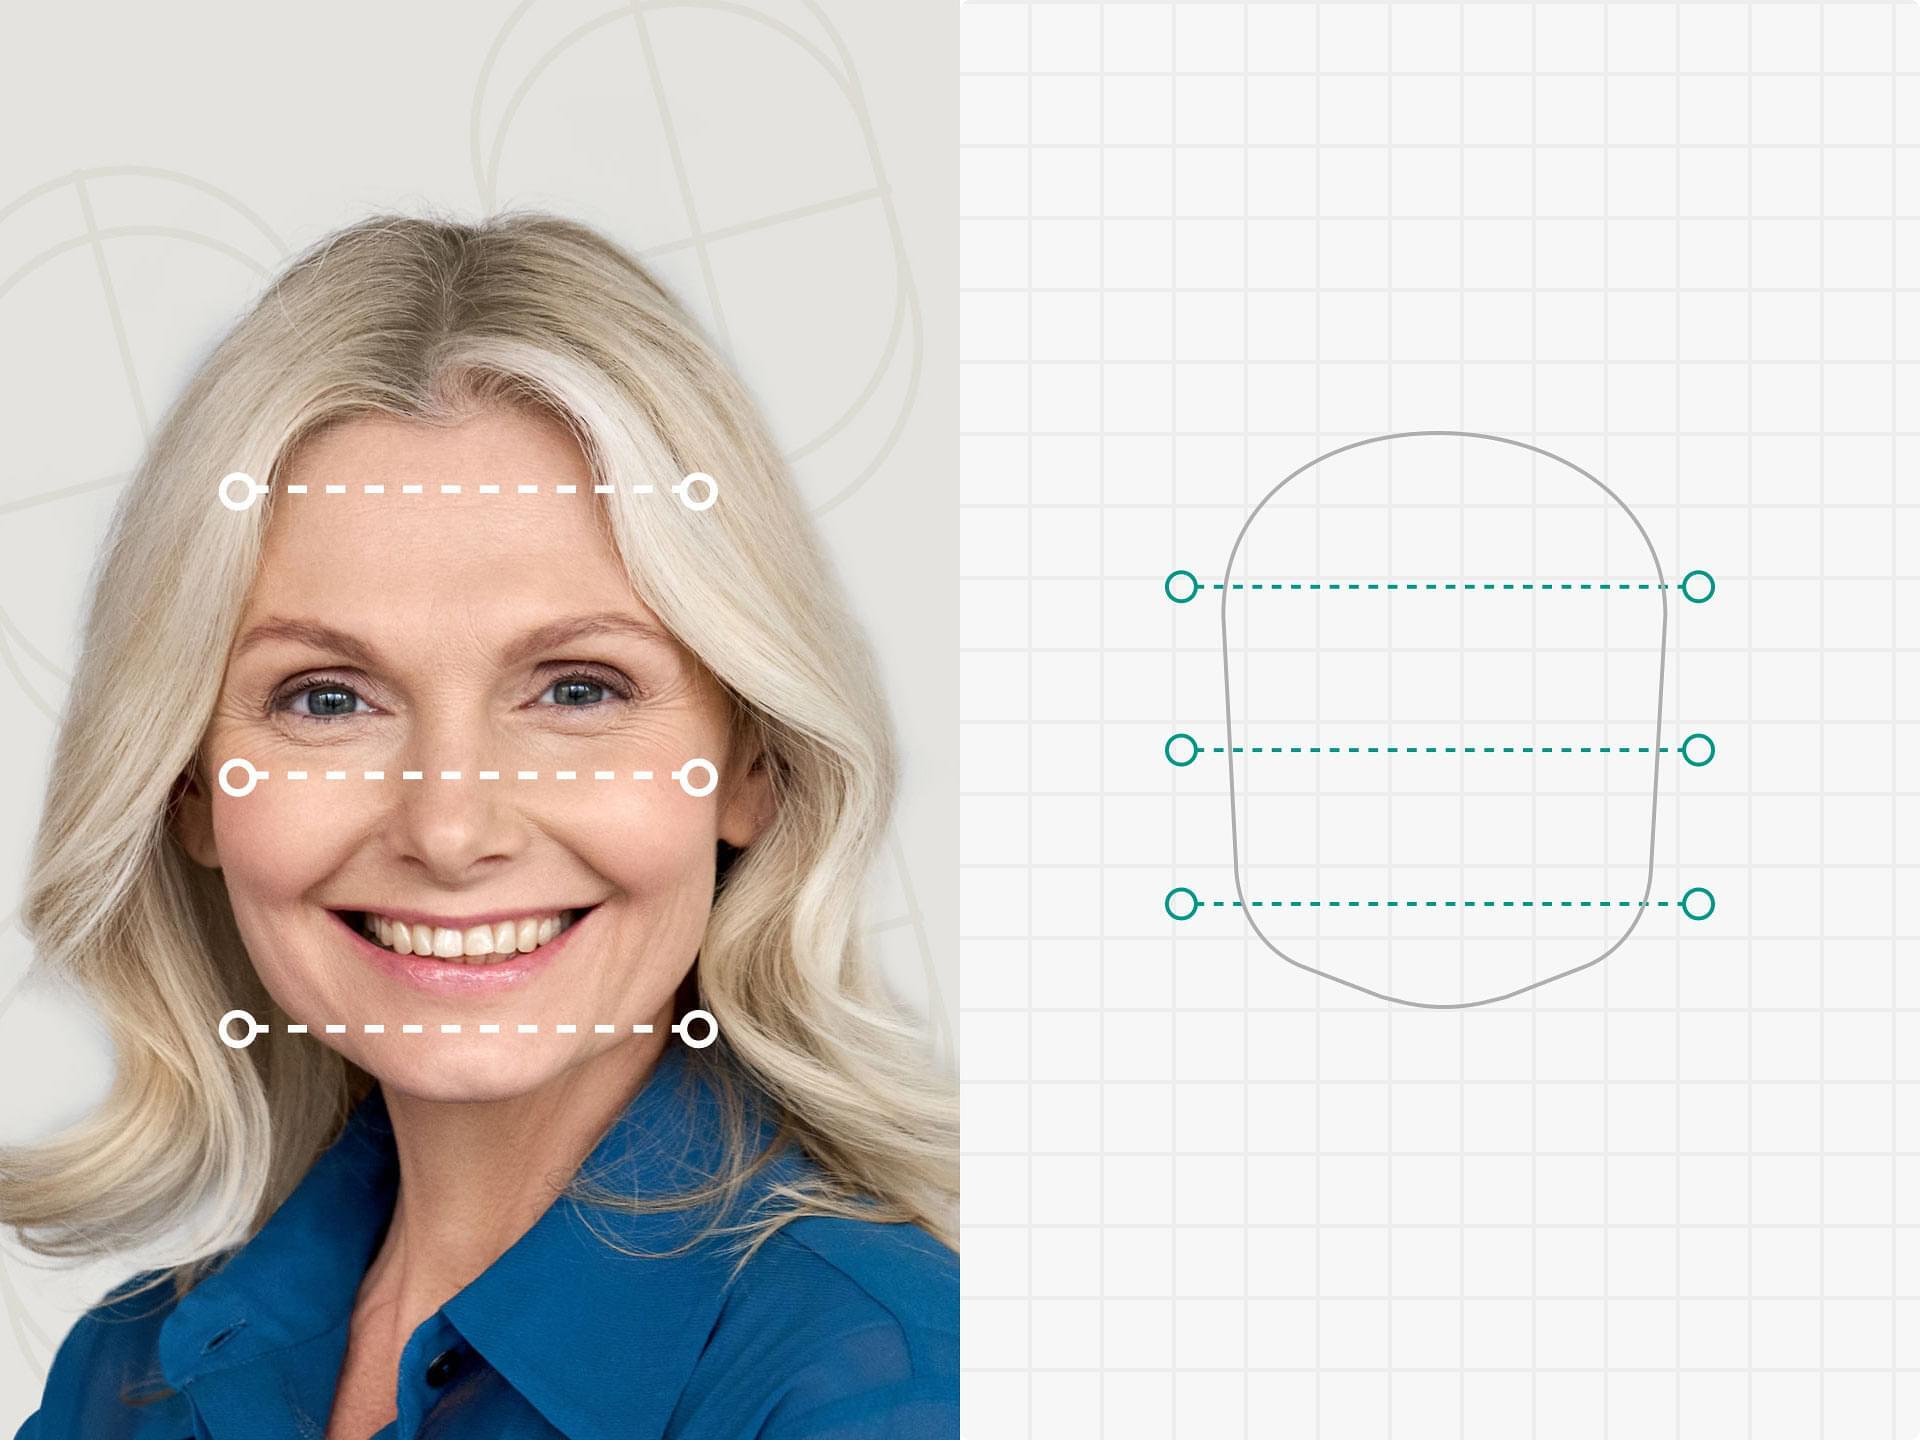 When browsing for eyewear for square faces, look for glasses with the following features